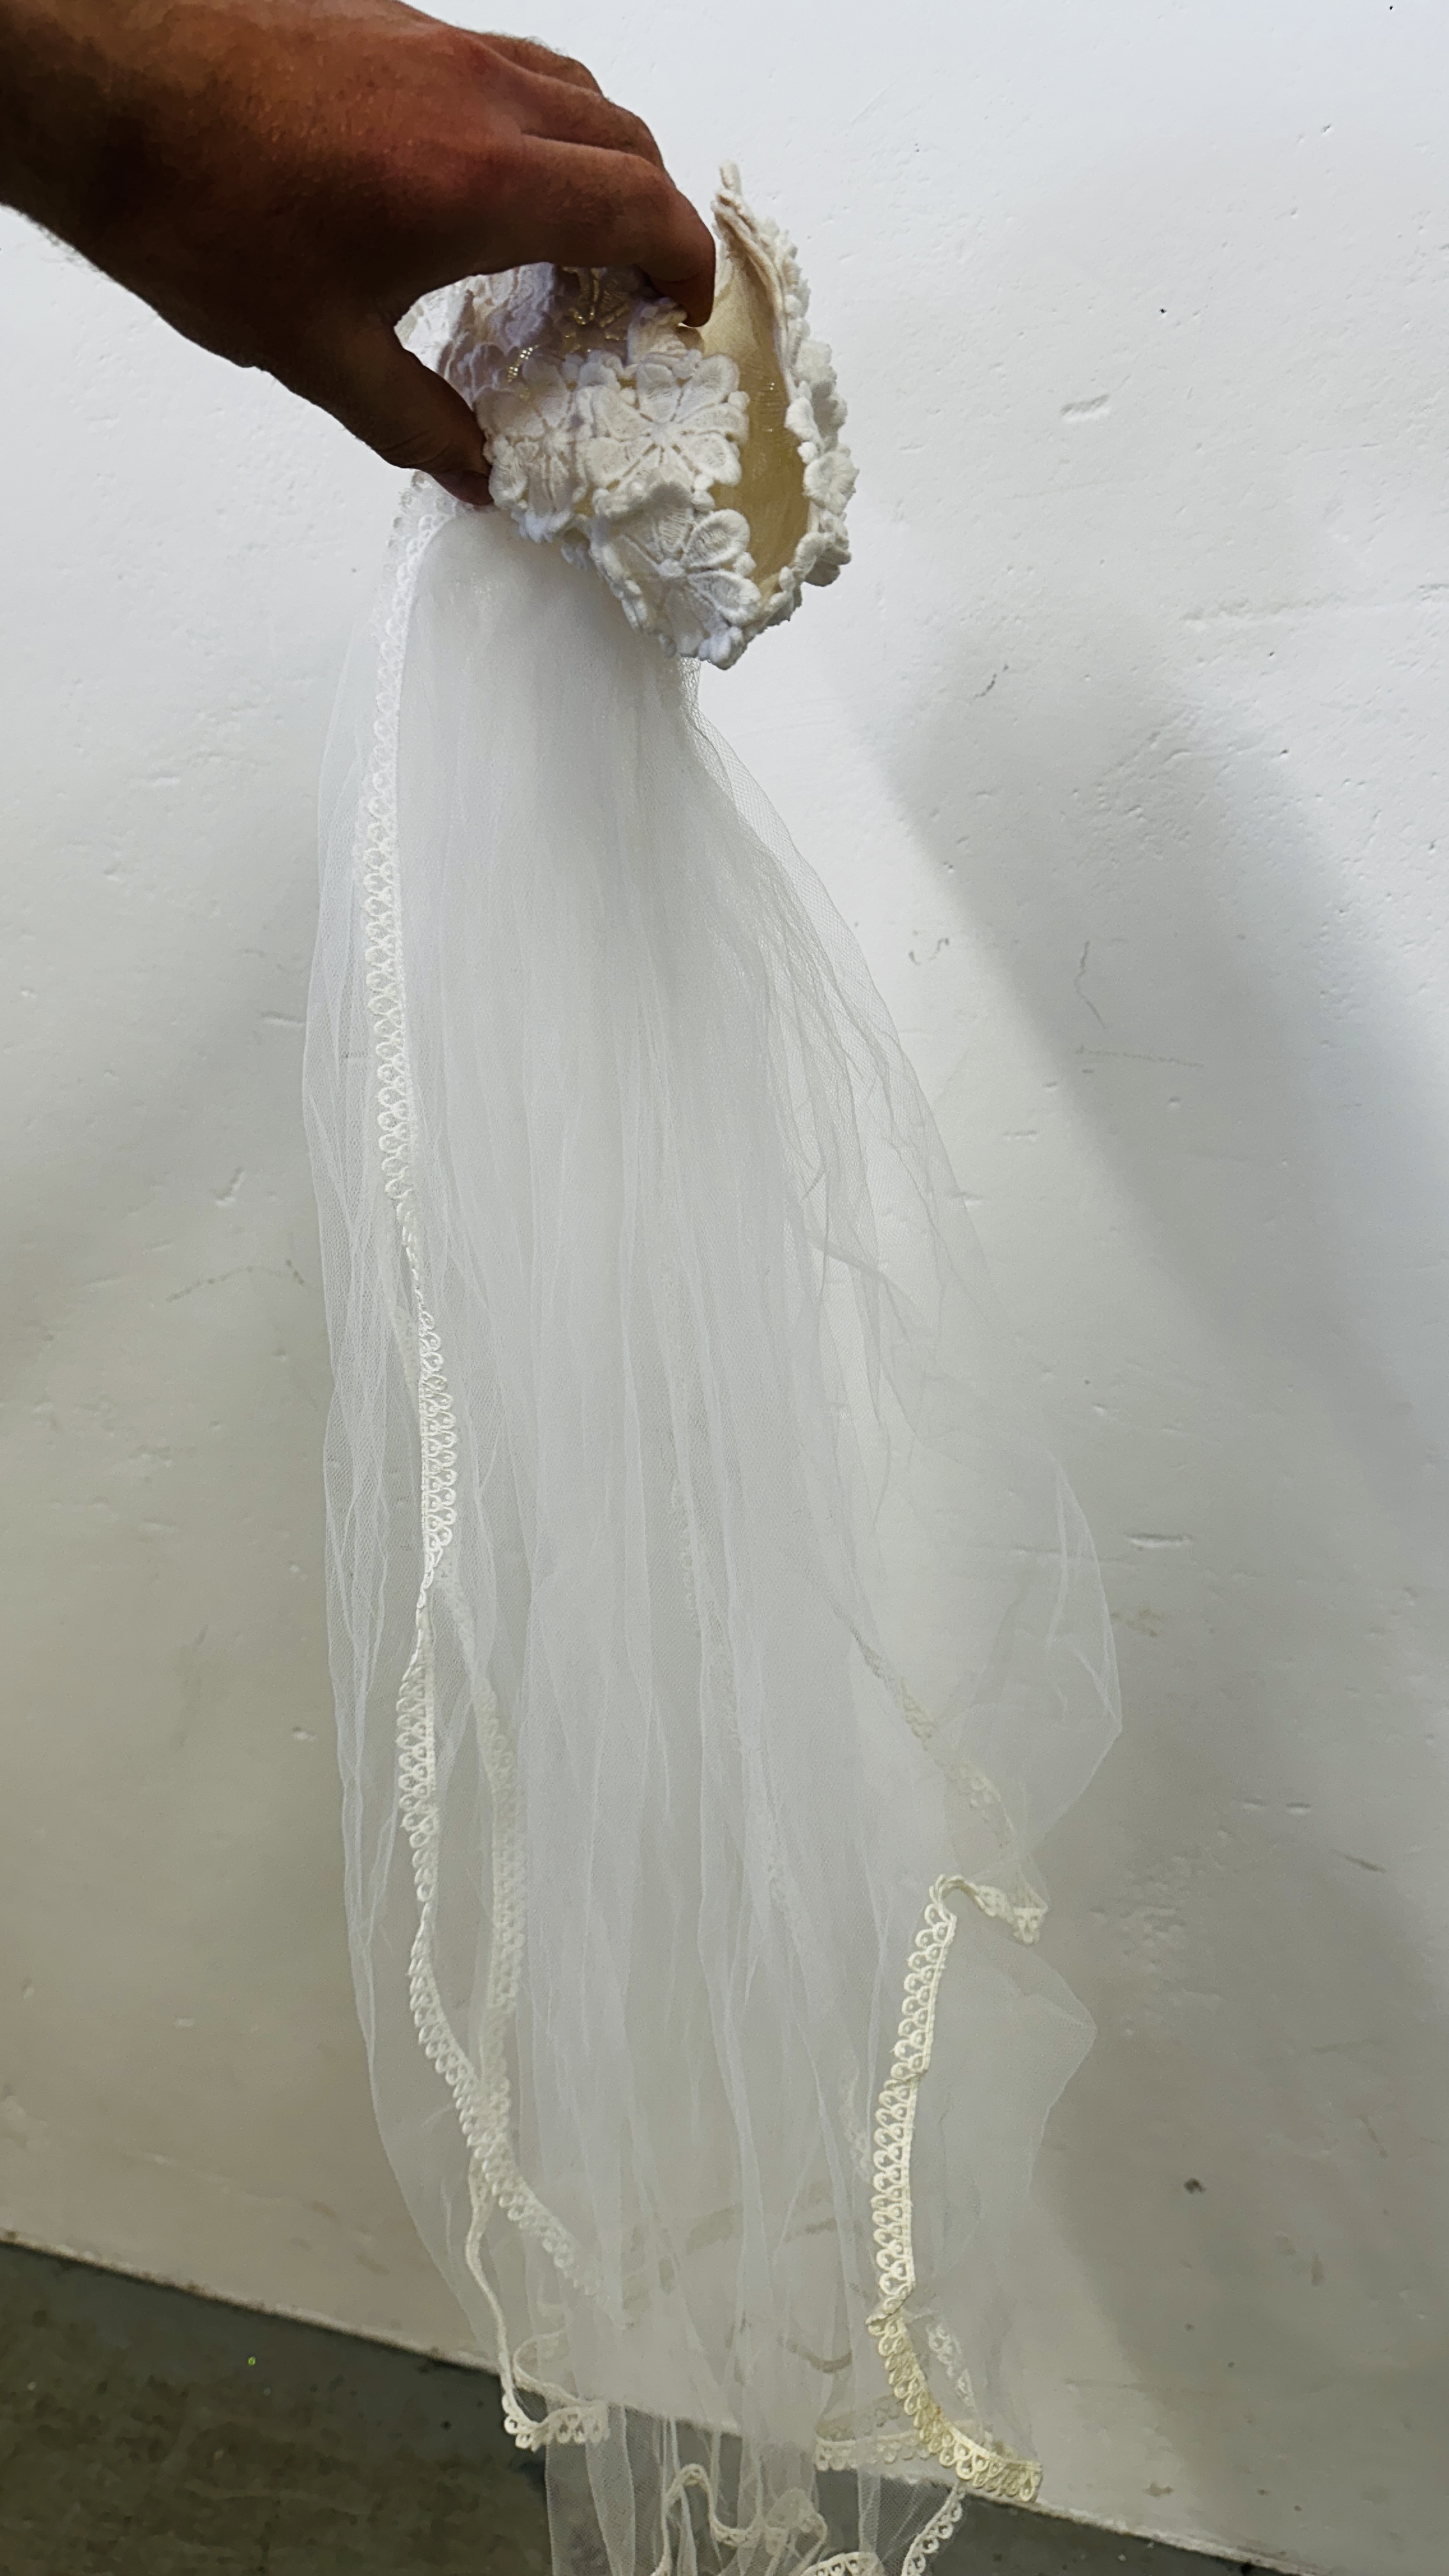 A "BIANCO EVENTO" WEDDING DRESS 40/L ALONG WITH TWO VEILS. - Image 11 of 11